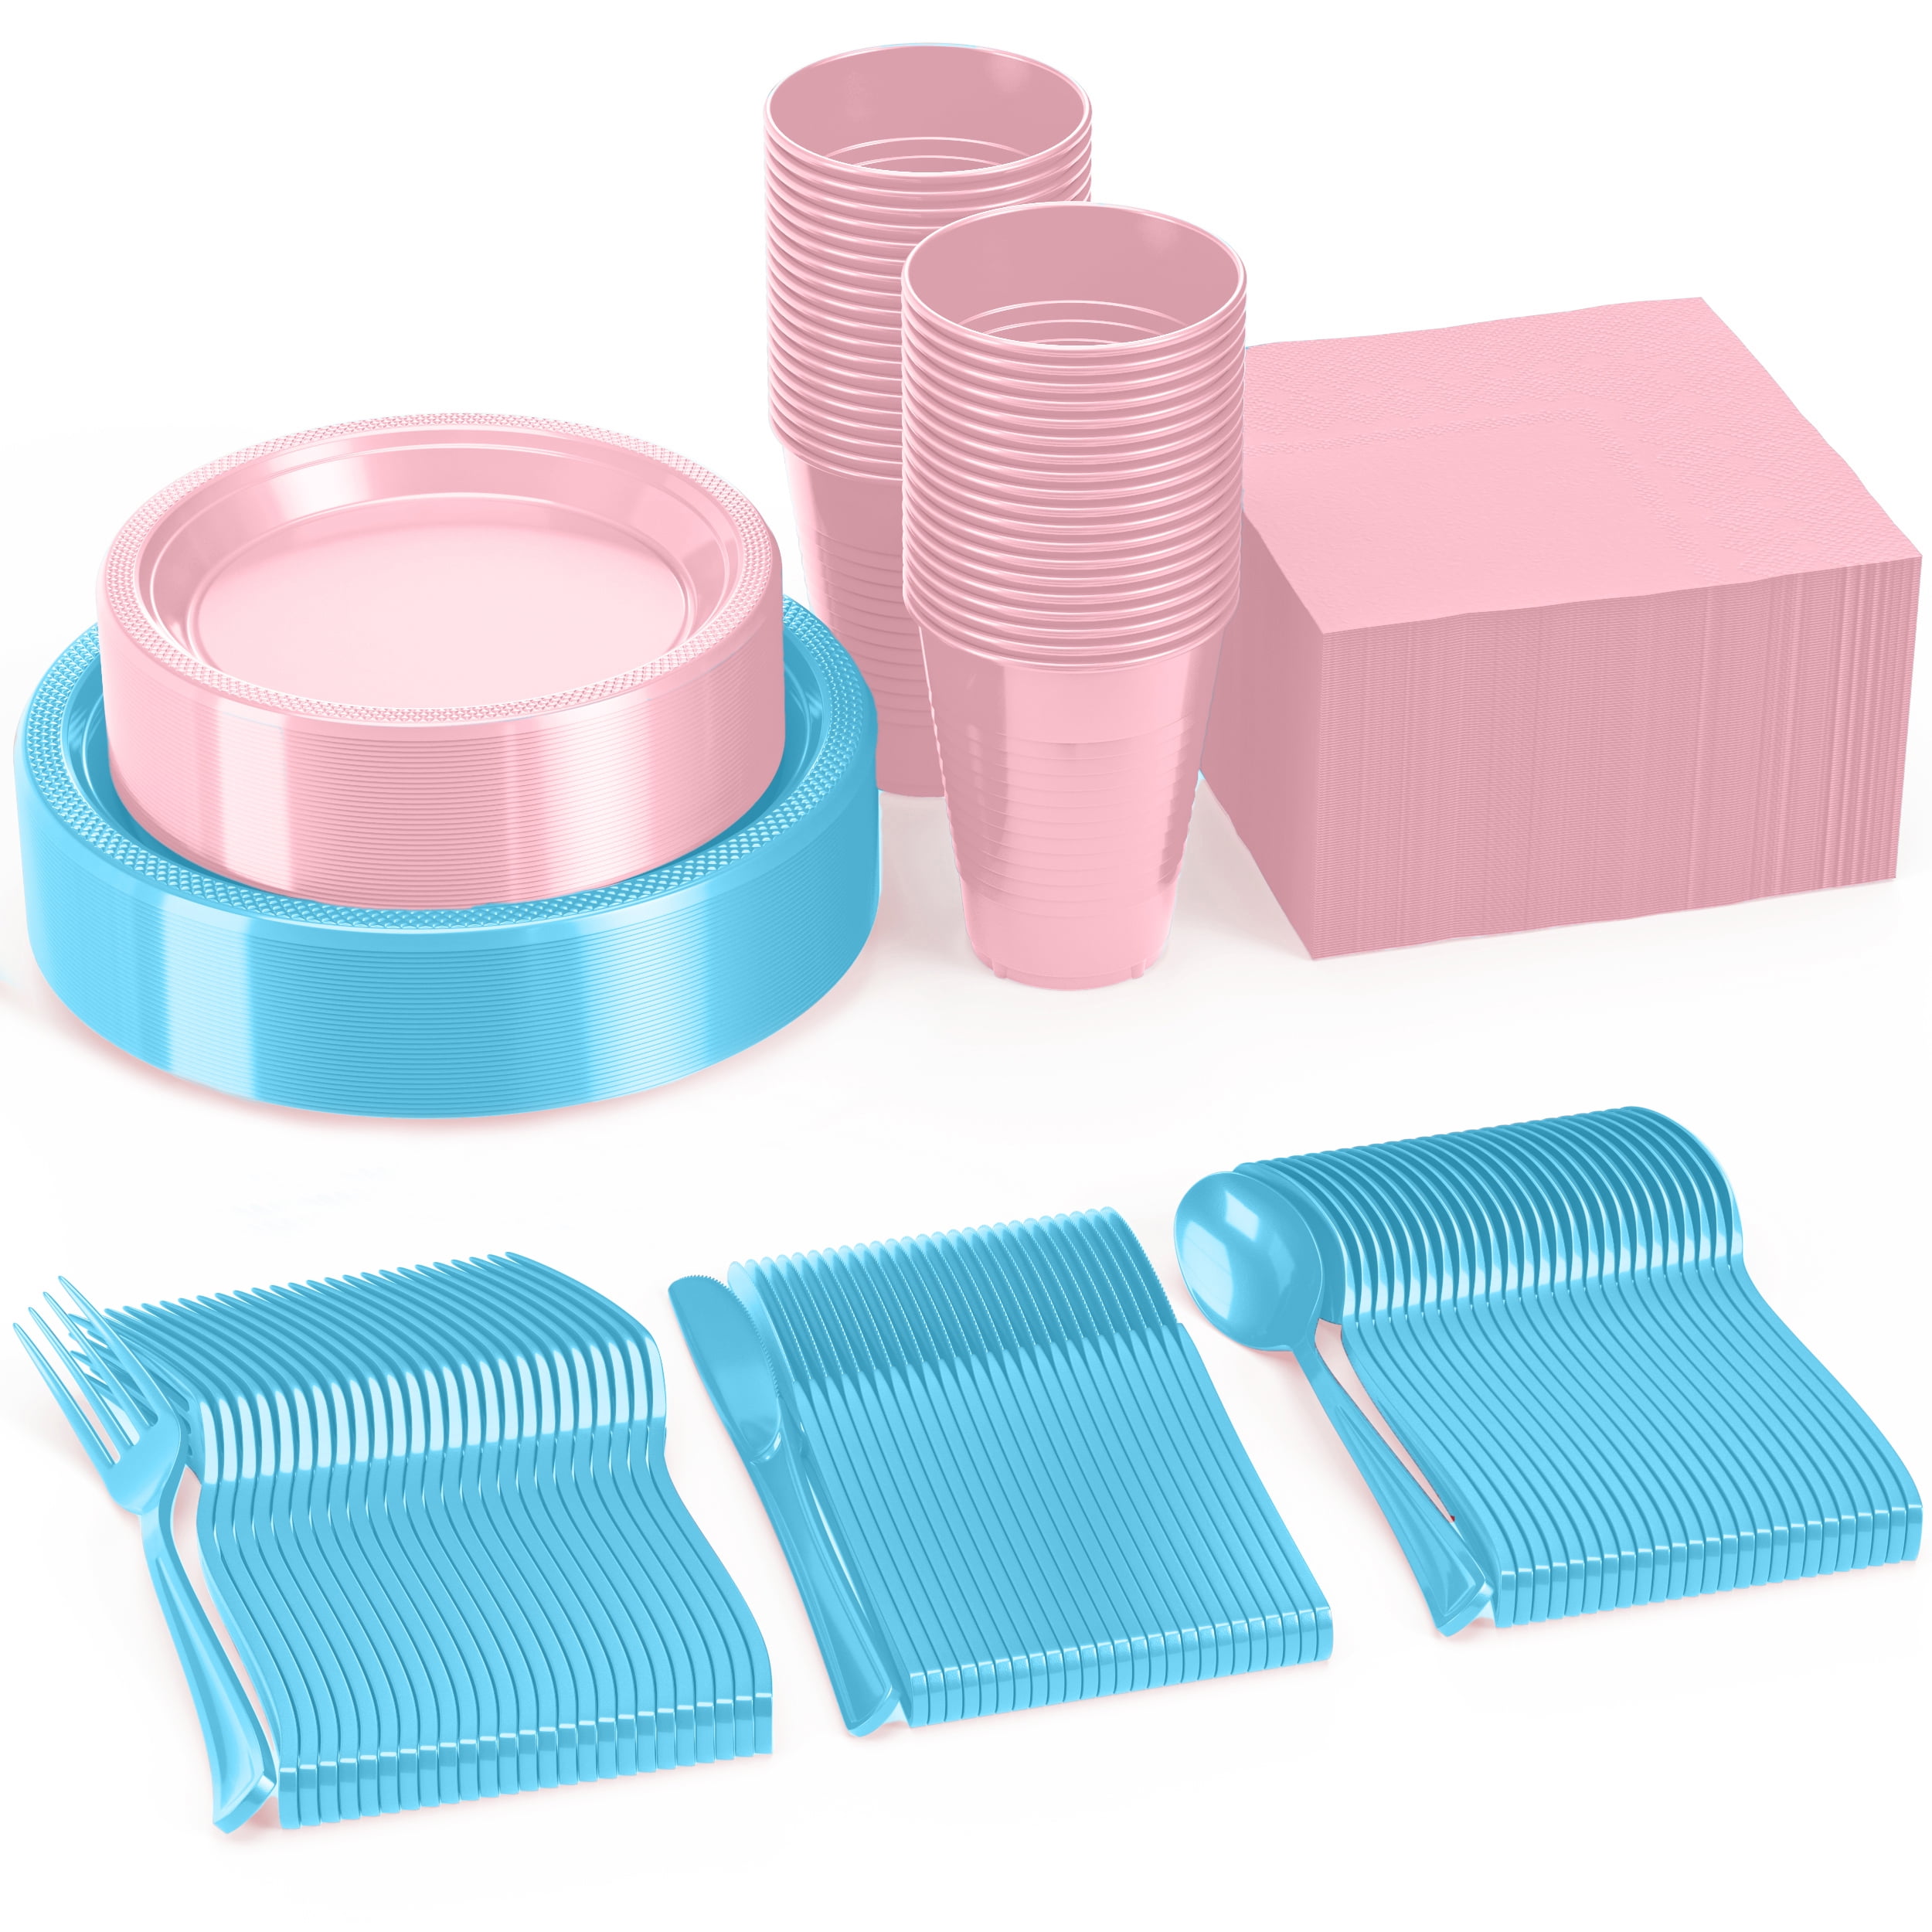 Serves 24 Blue Party Supplies, Disposable Paper Plates, Cups, Napkins for  Birthday Party, Graduation, Gender Reveal, Baby Boy Shower, Picnic,  Celebration (72 Pieces)